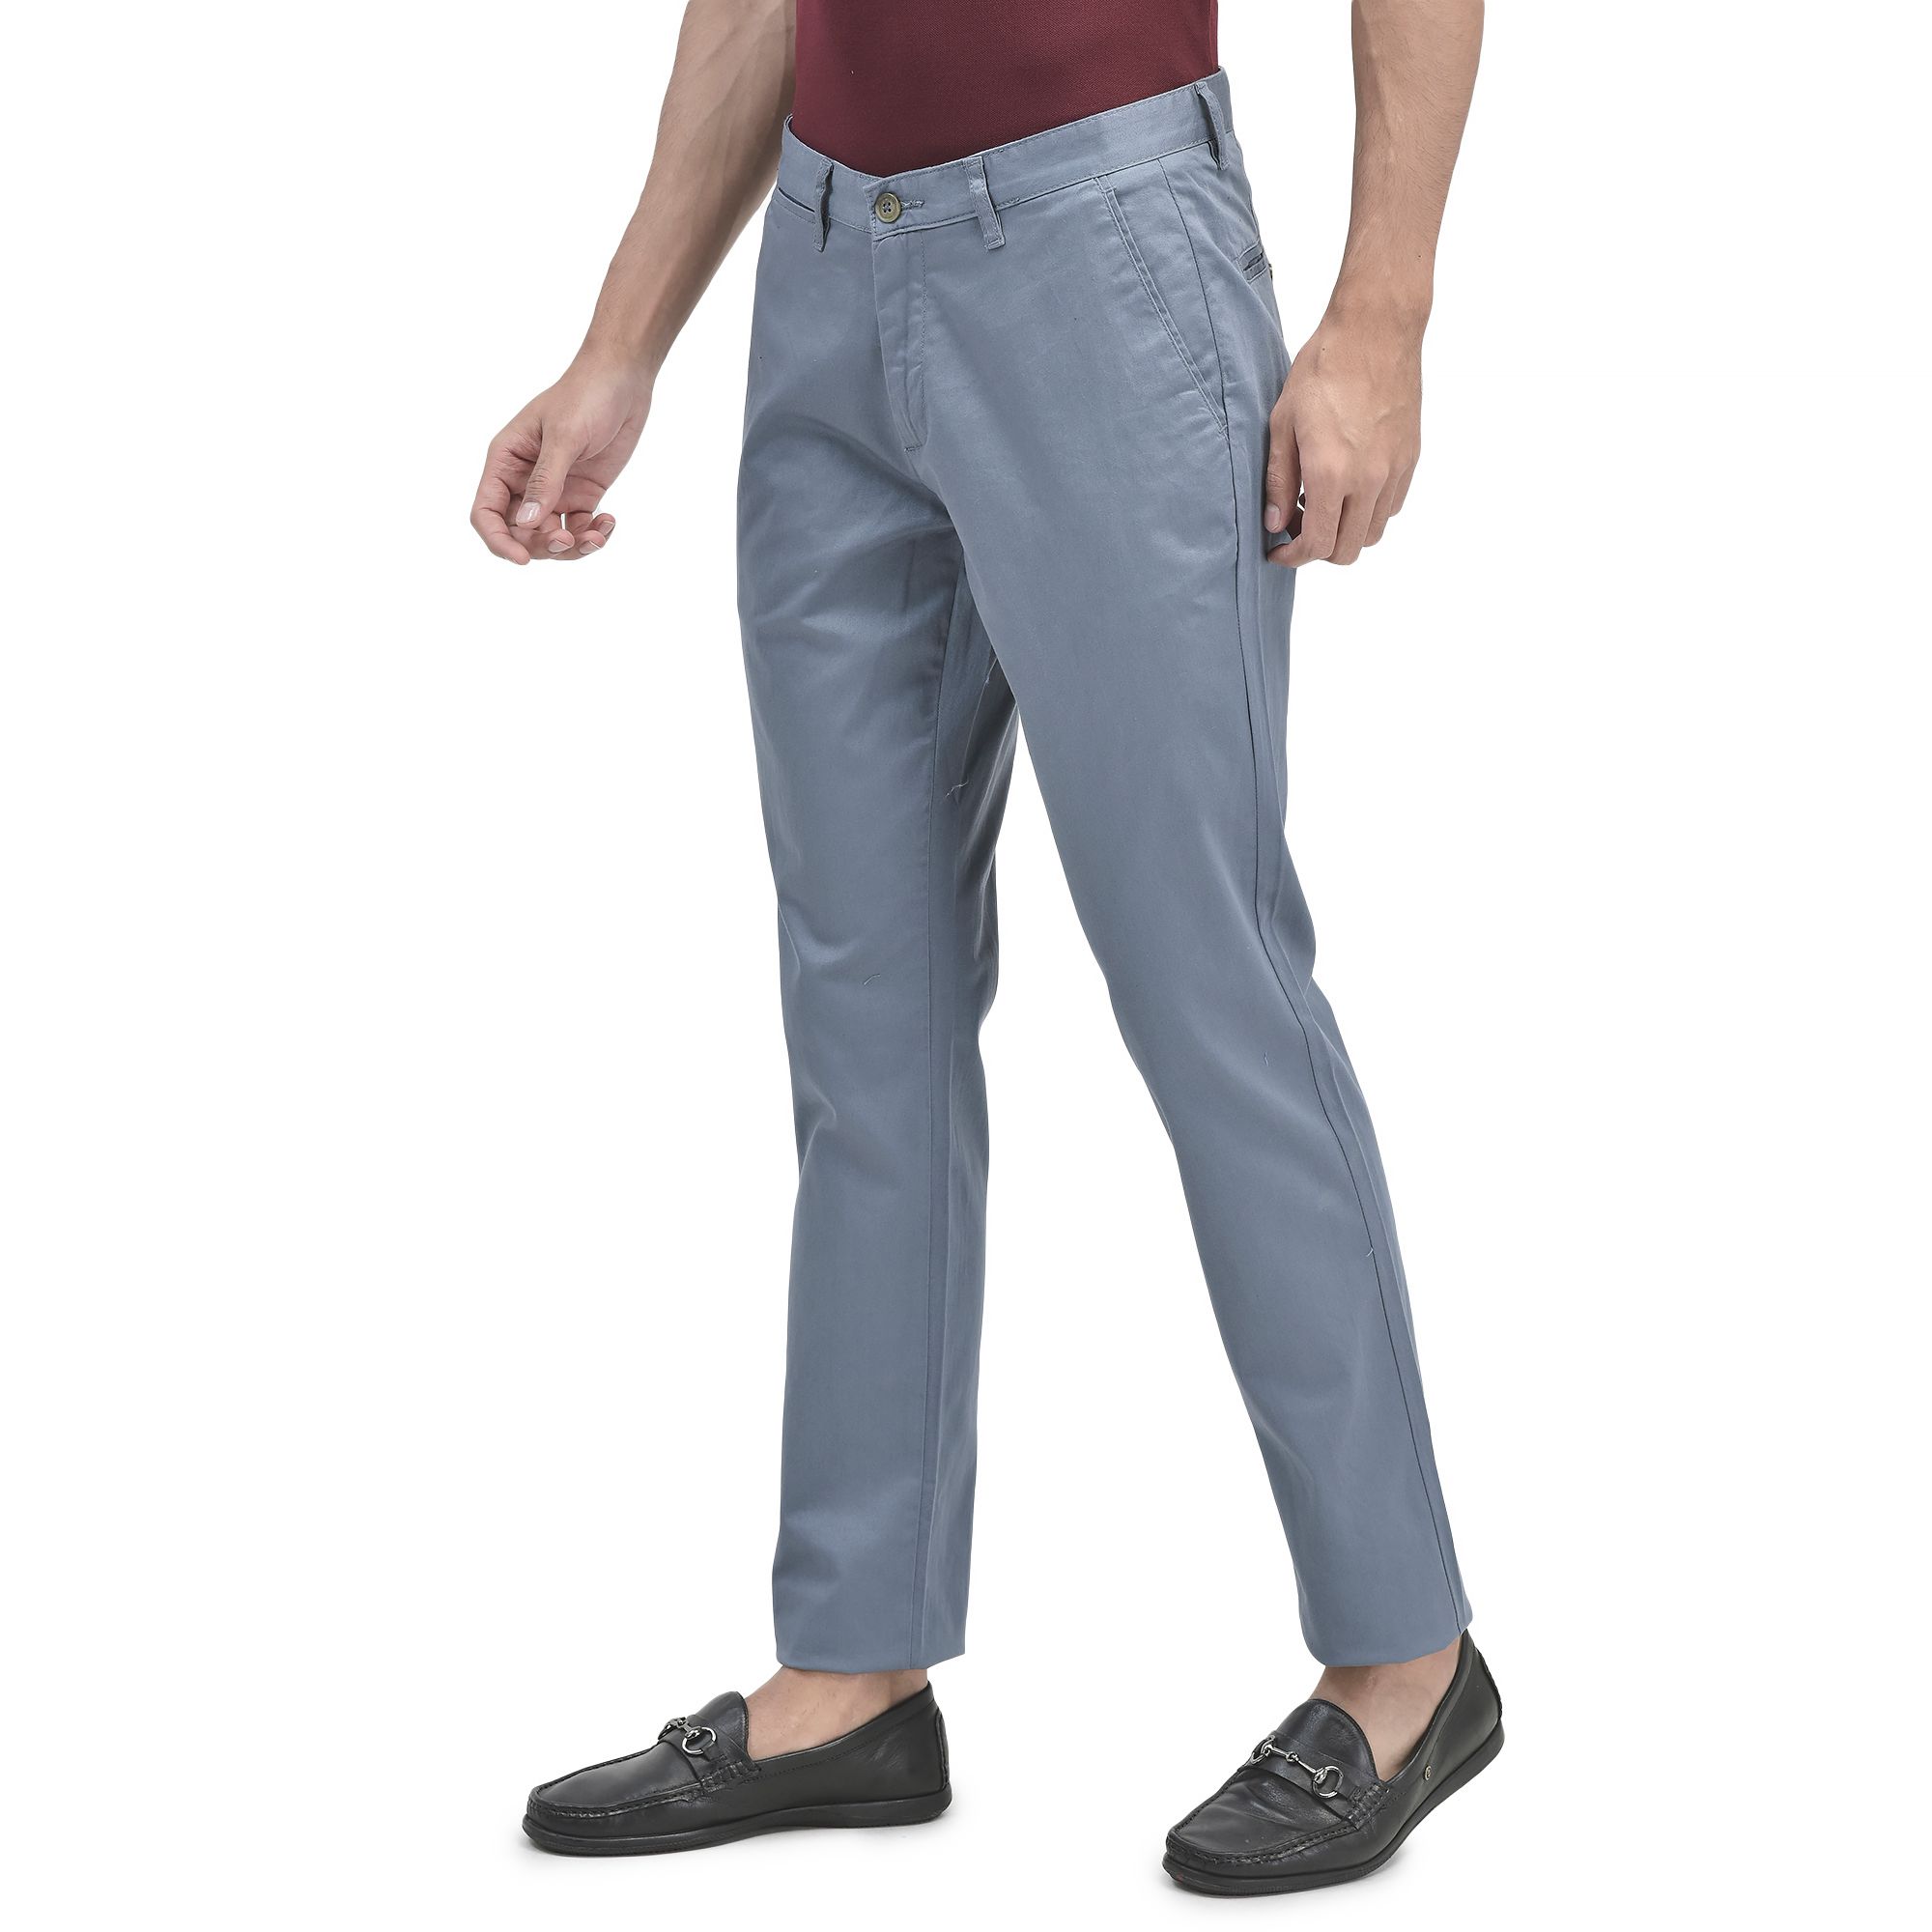 Lblue Chinos for Men